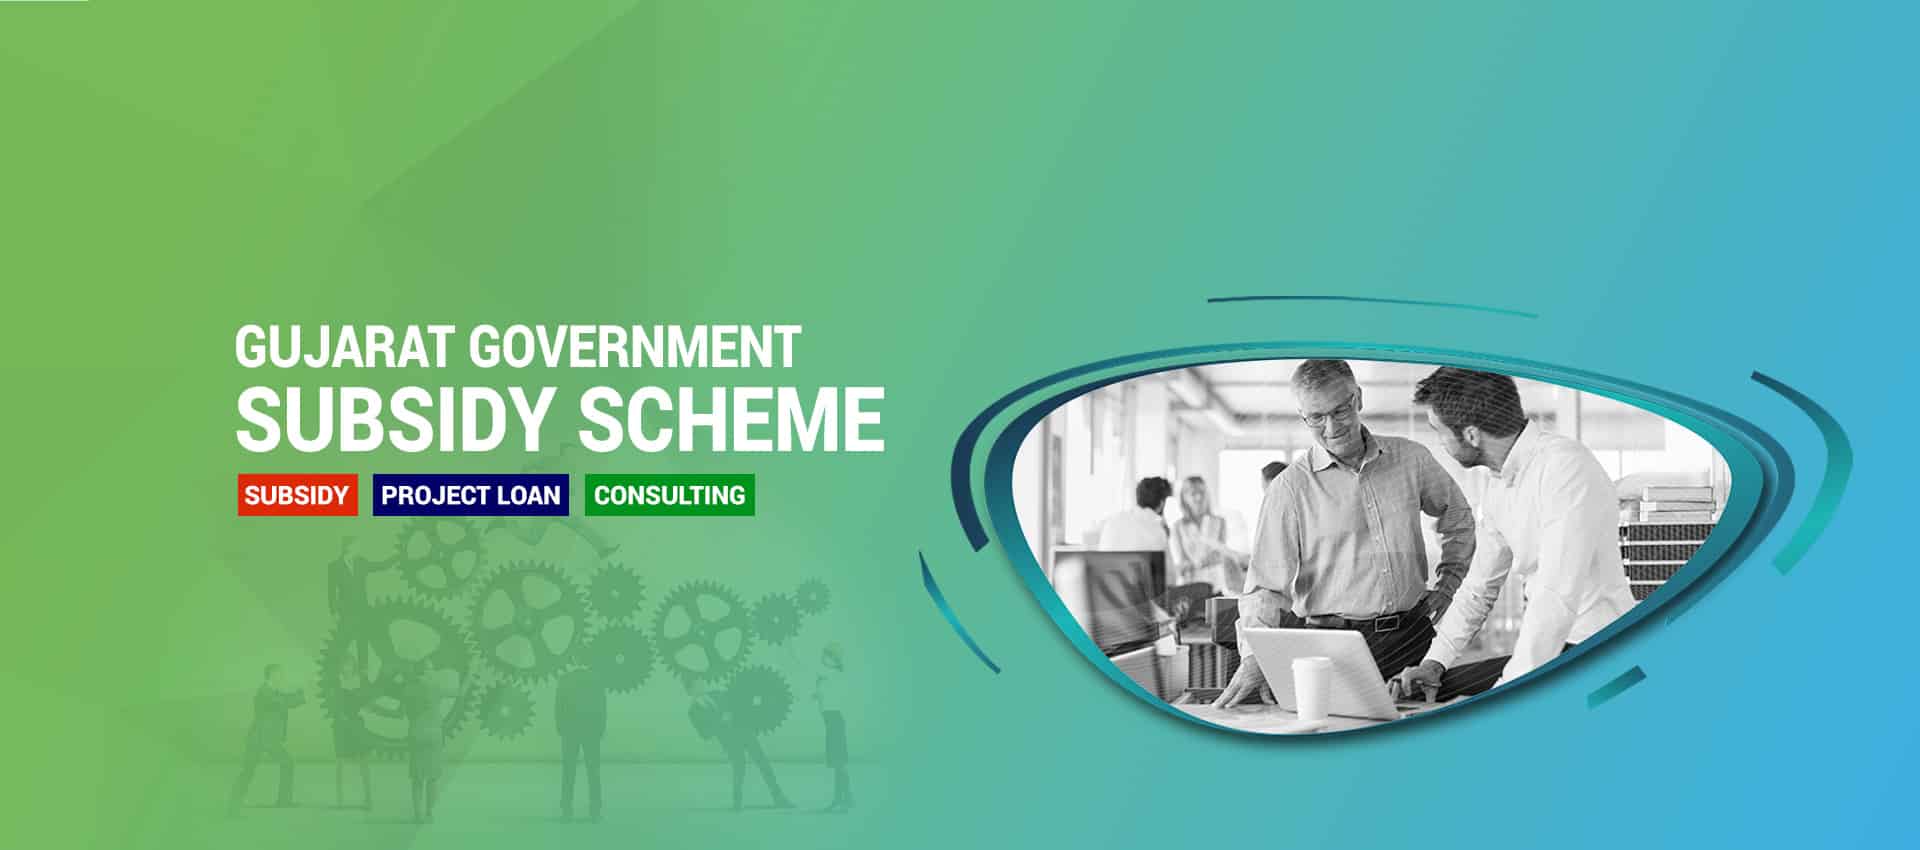 new-banner for gujarat government subsidy scheme